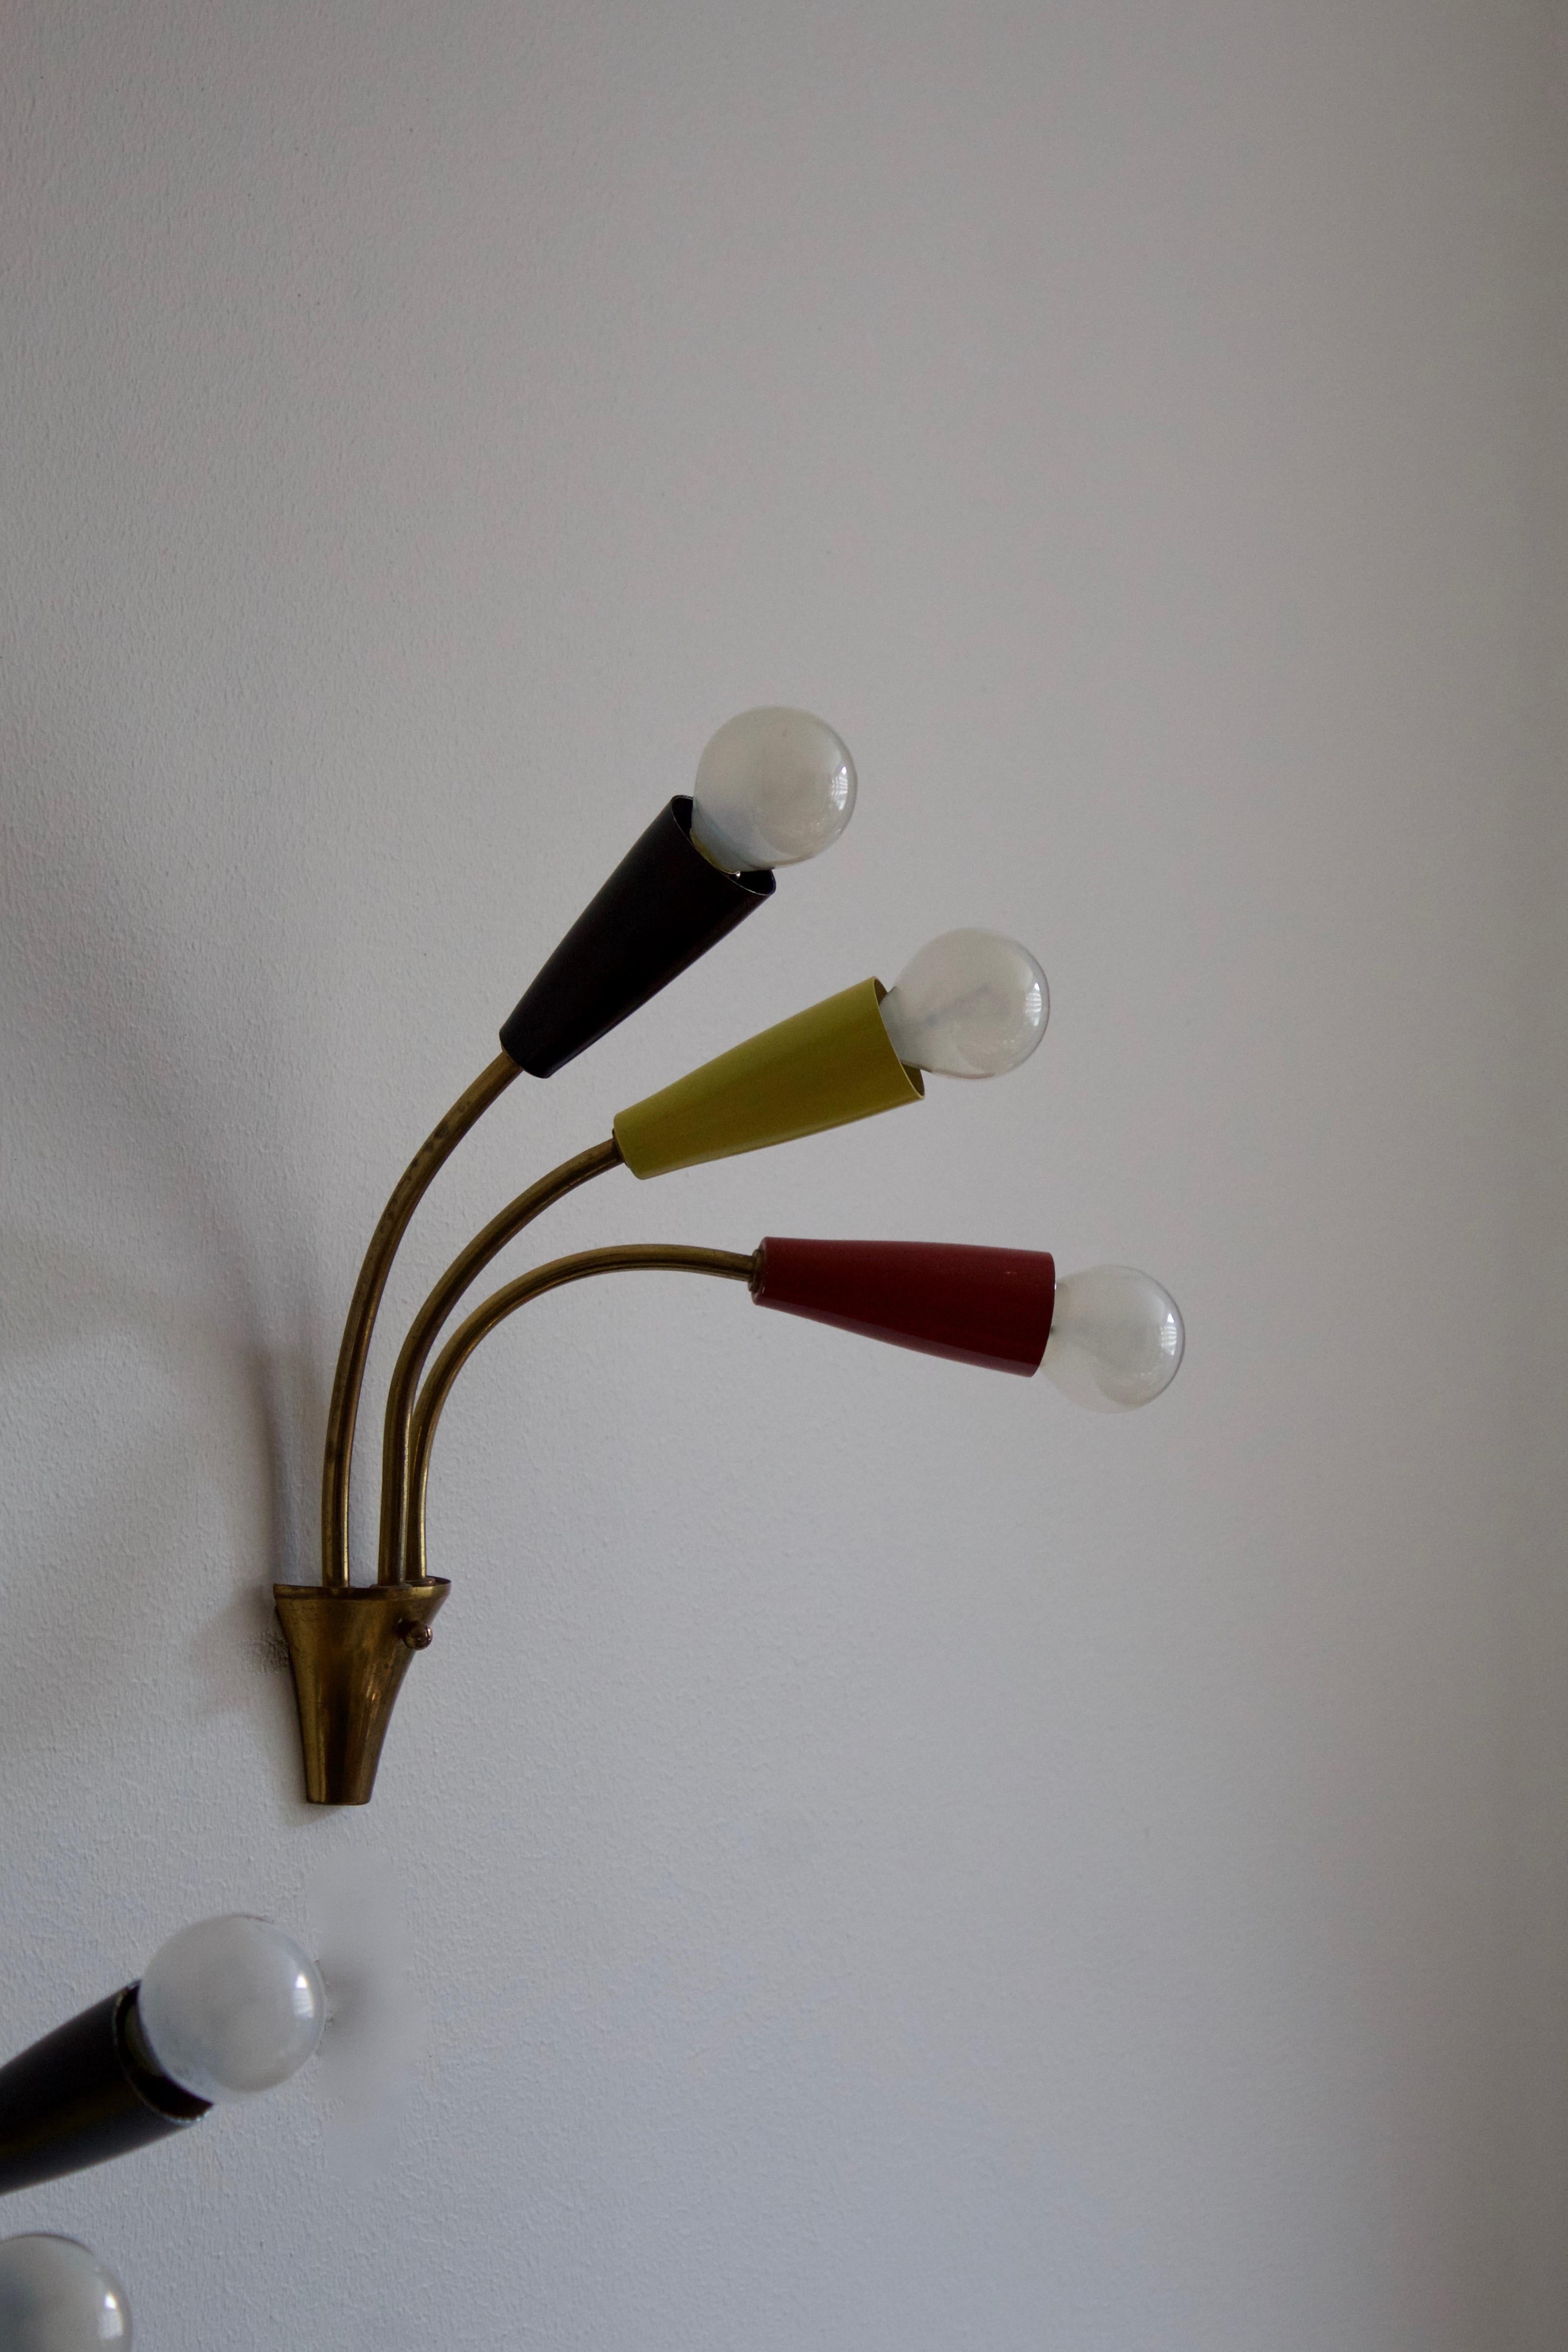 Mid-Century Modern Italian, Three-Armed Wall Lights, Brass, Lacquered Metal, Italy, 1950s For Sale